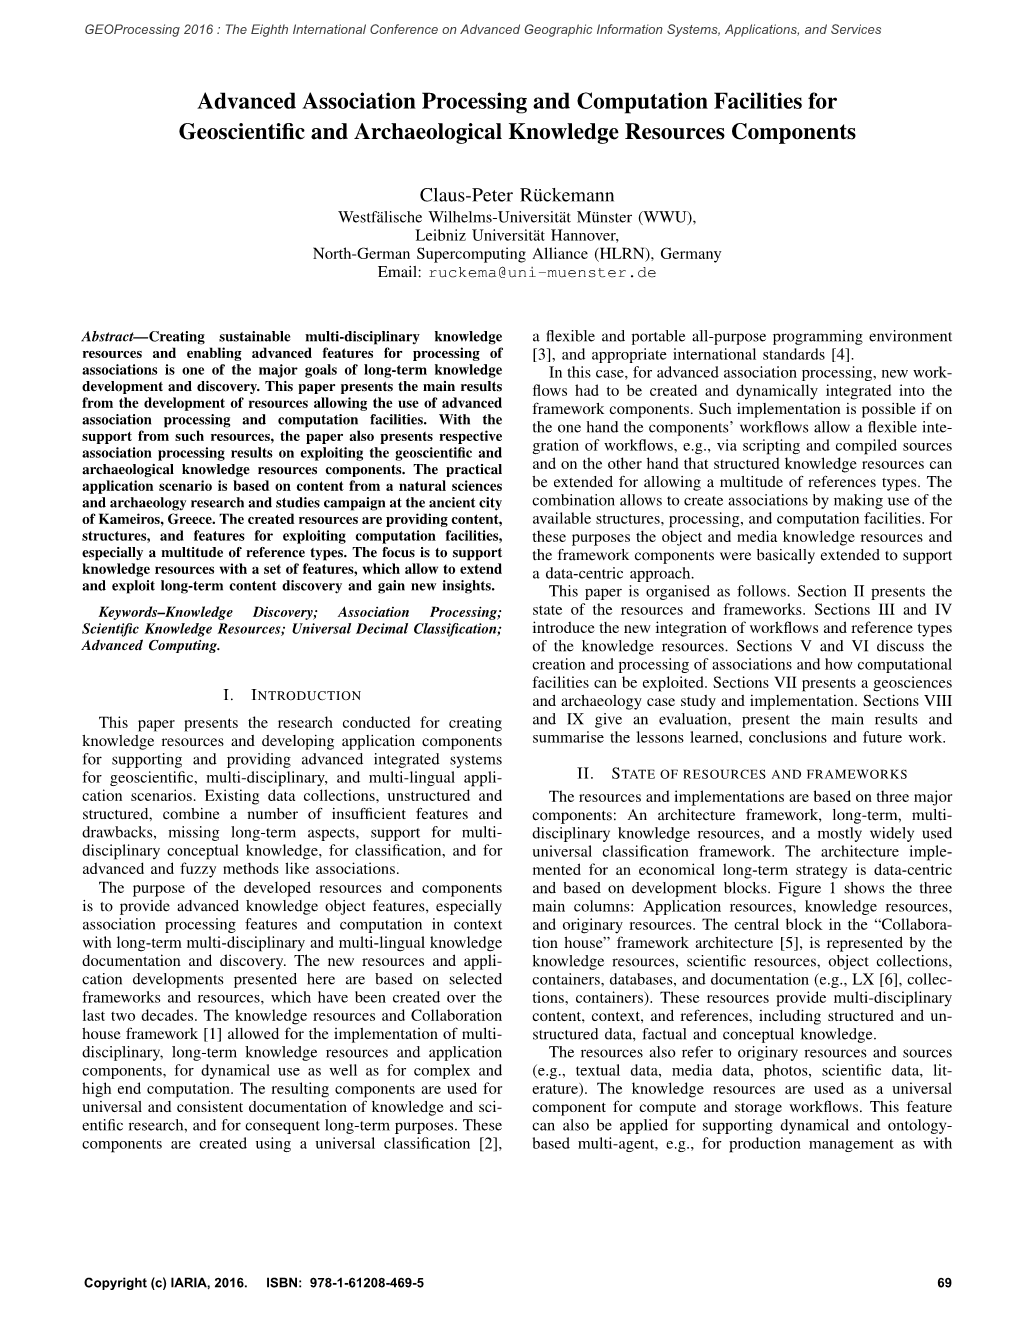 Advanced Association Processing and Computation Facilities for Geoscientiﬁc and Archaeological Knowledge Resources Components